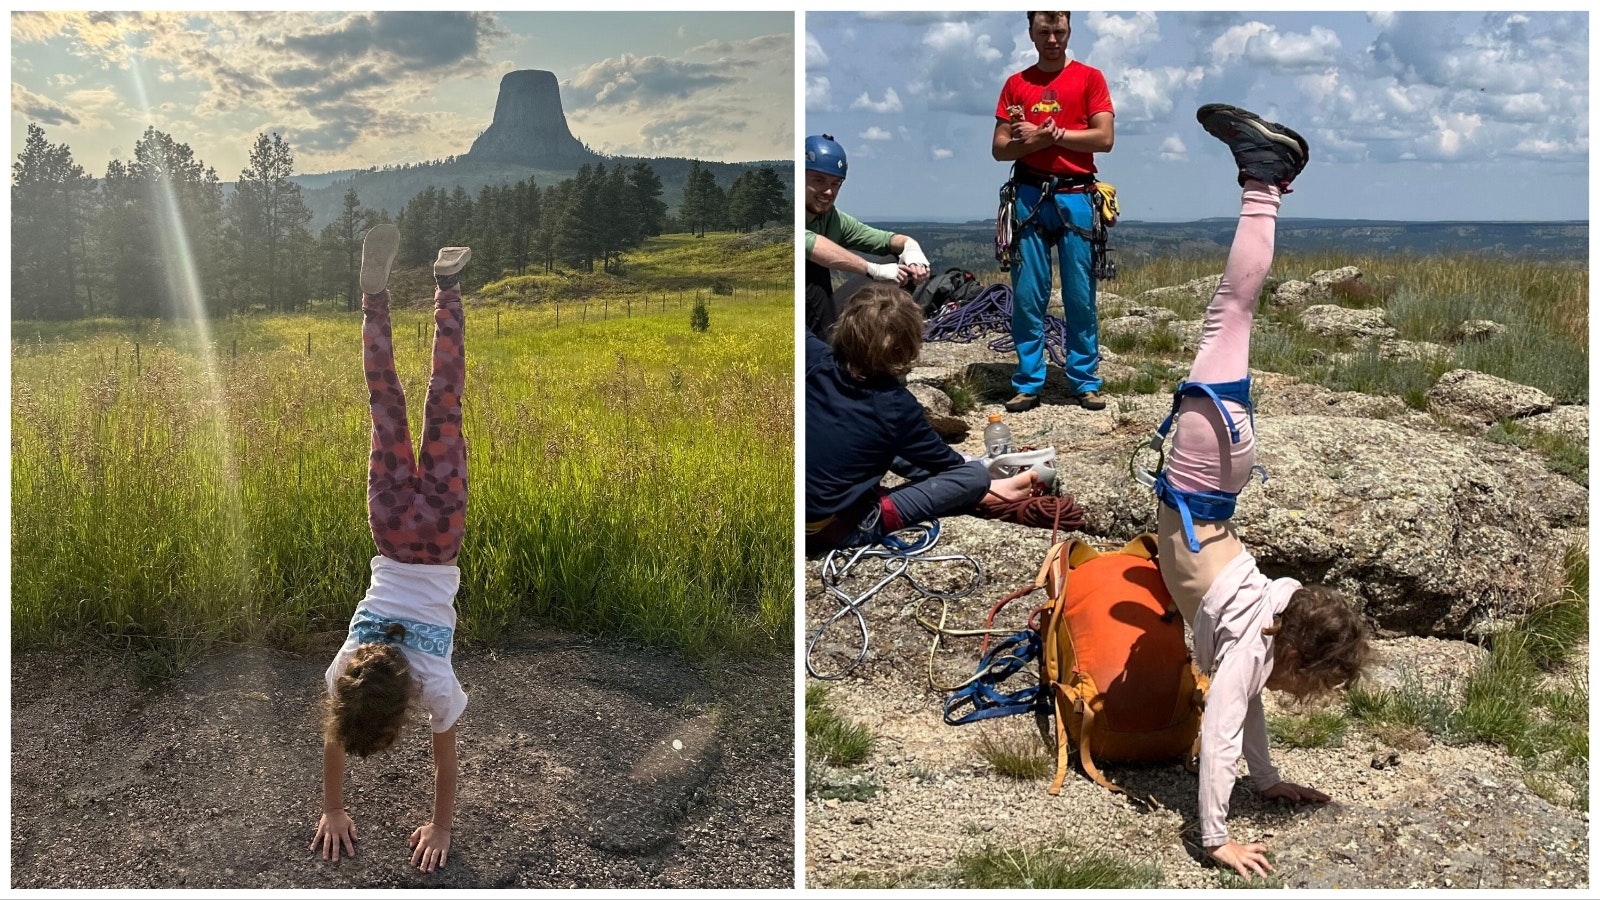 Alice Galy, 6, of Massachusetts, does a handstand near the base of Devils Tower before climbing it. She vowed to also do a handstand once she reached to top, which she did, right.